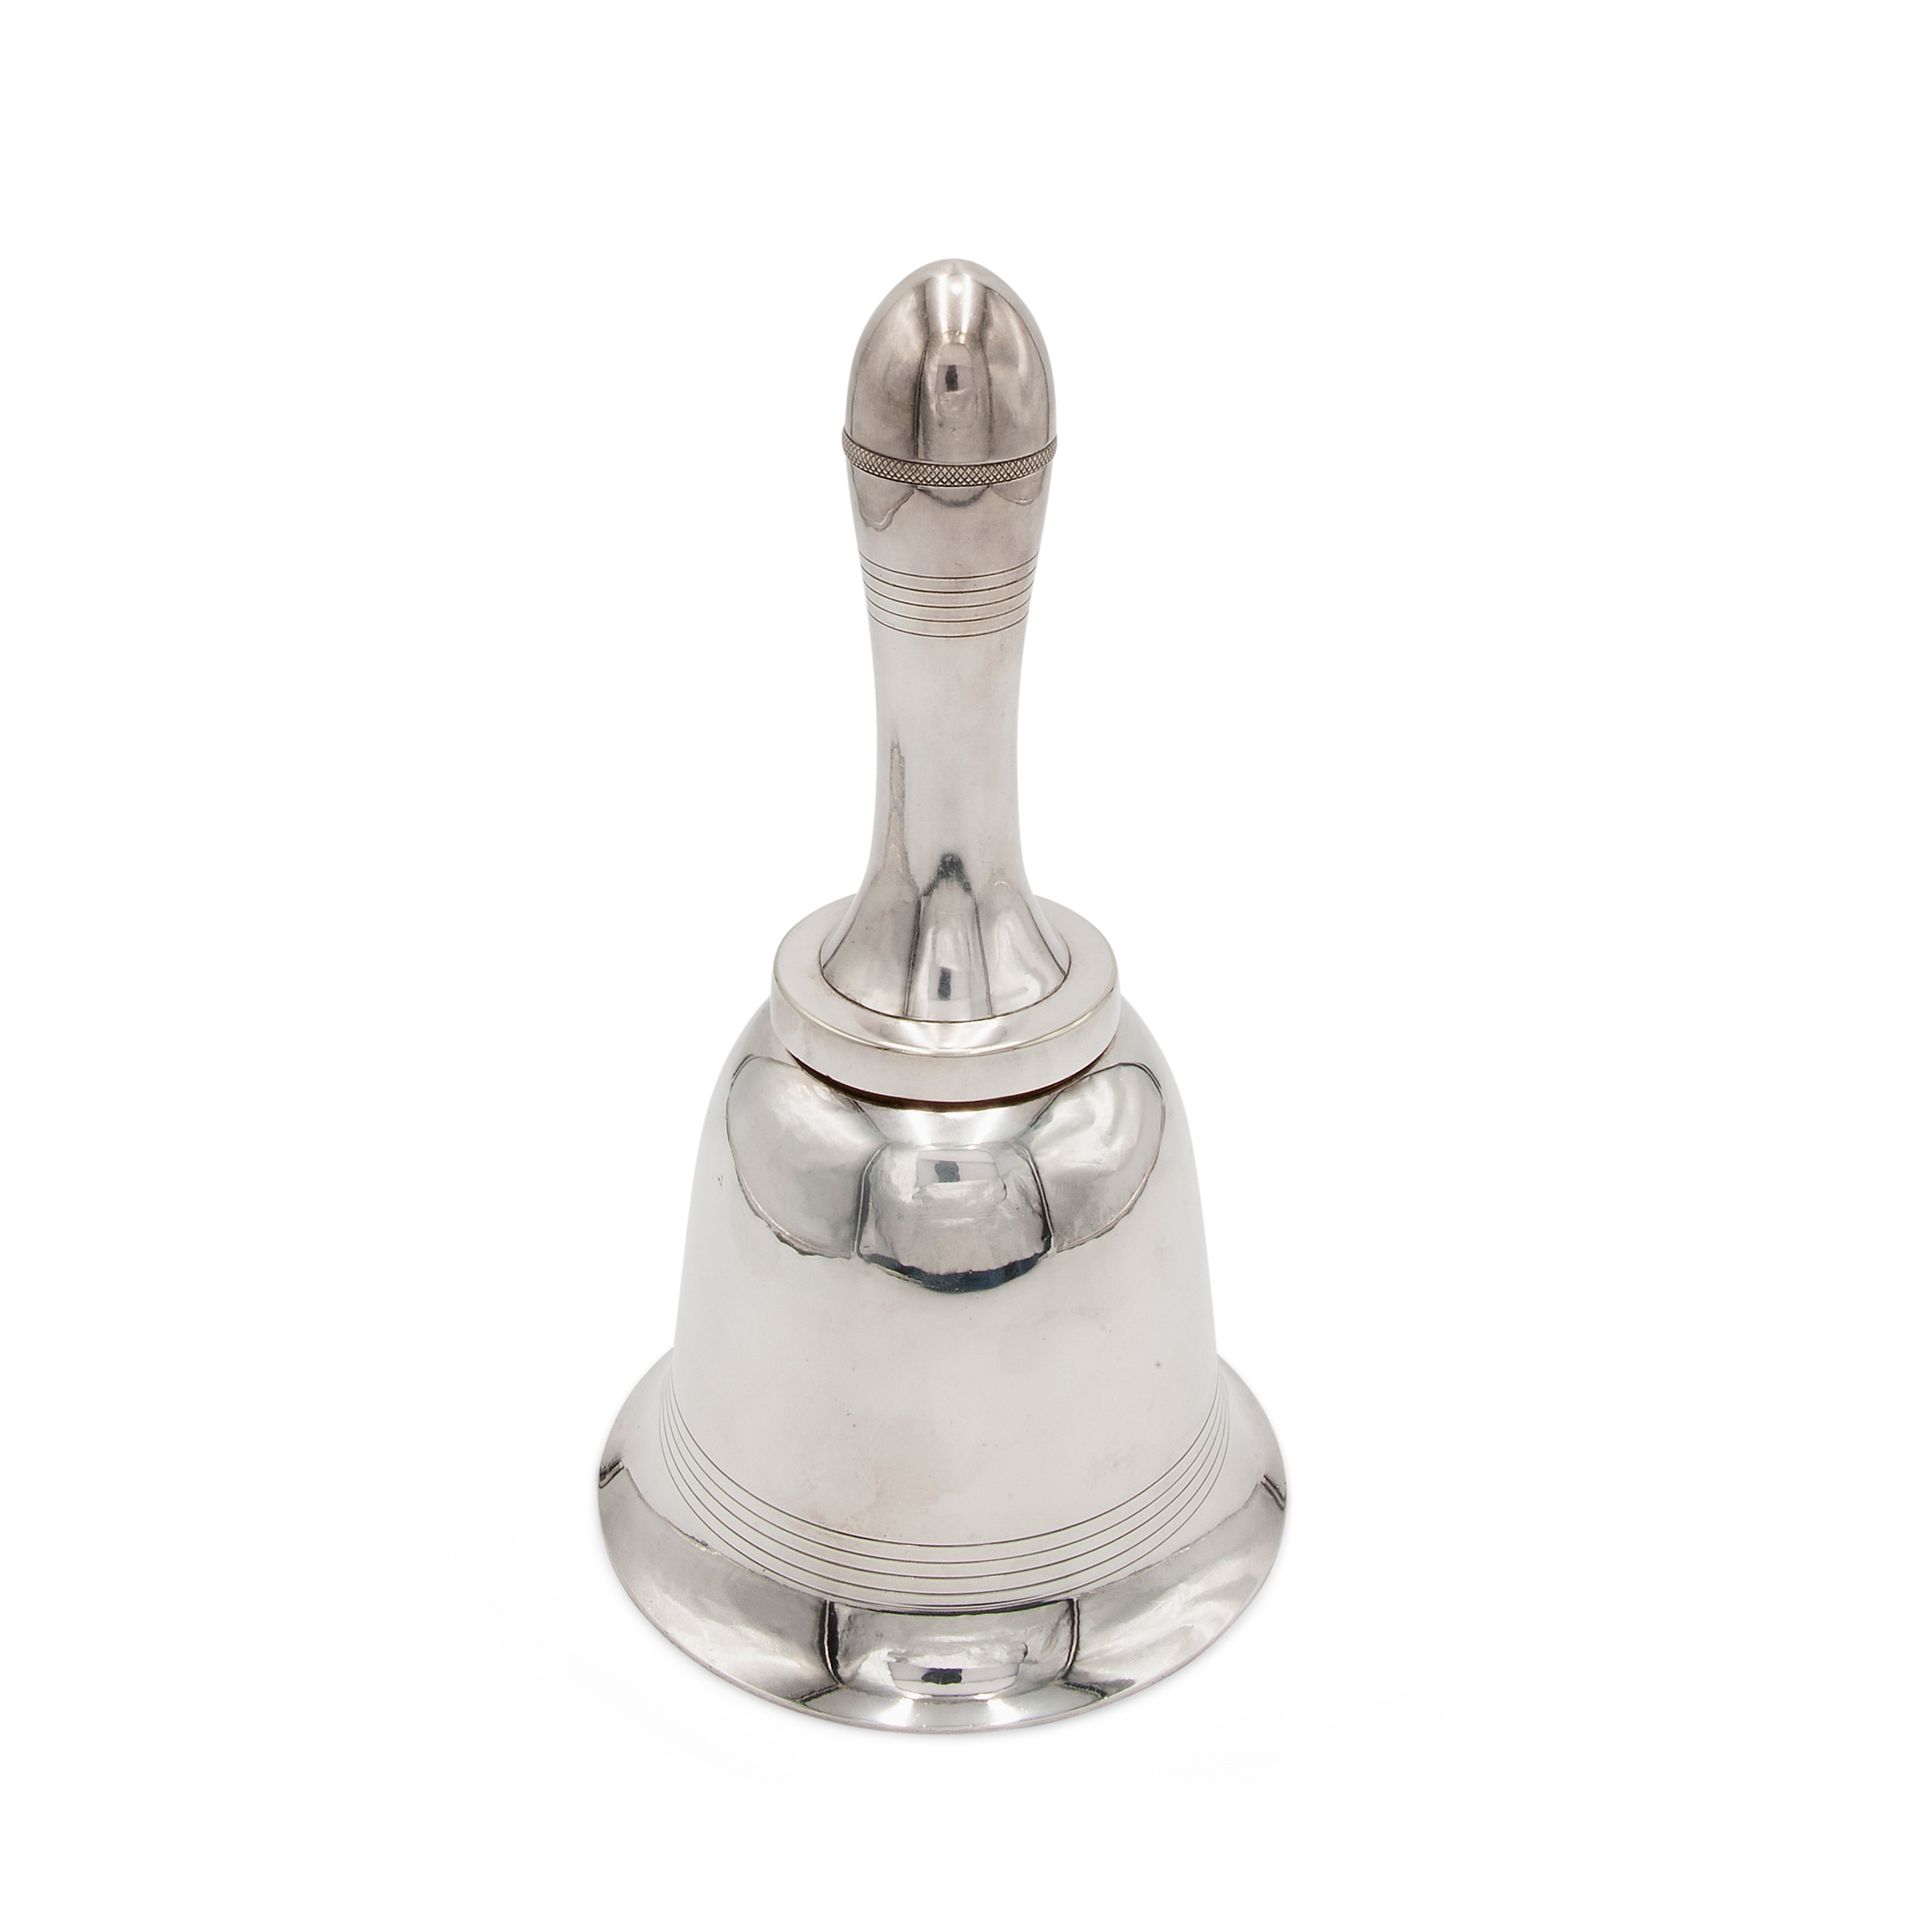 Edward & Sons, Bell-shaped cocktail shaker, circa 1935 Made of silver-plated met&hellip;